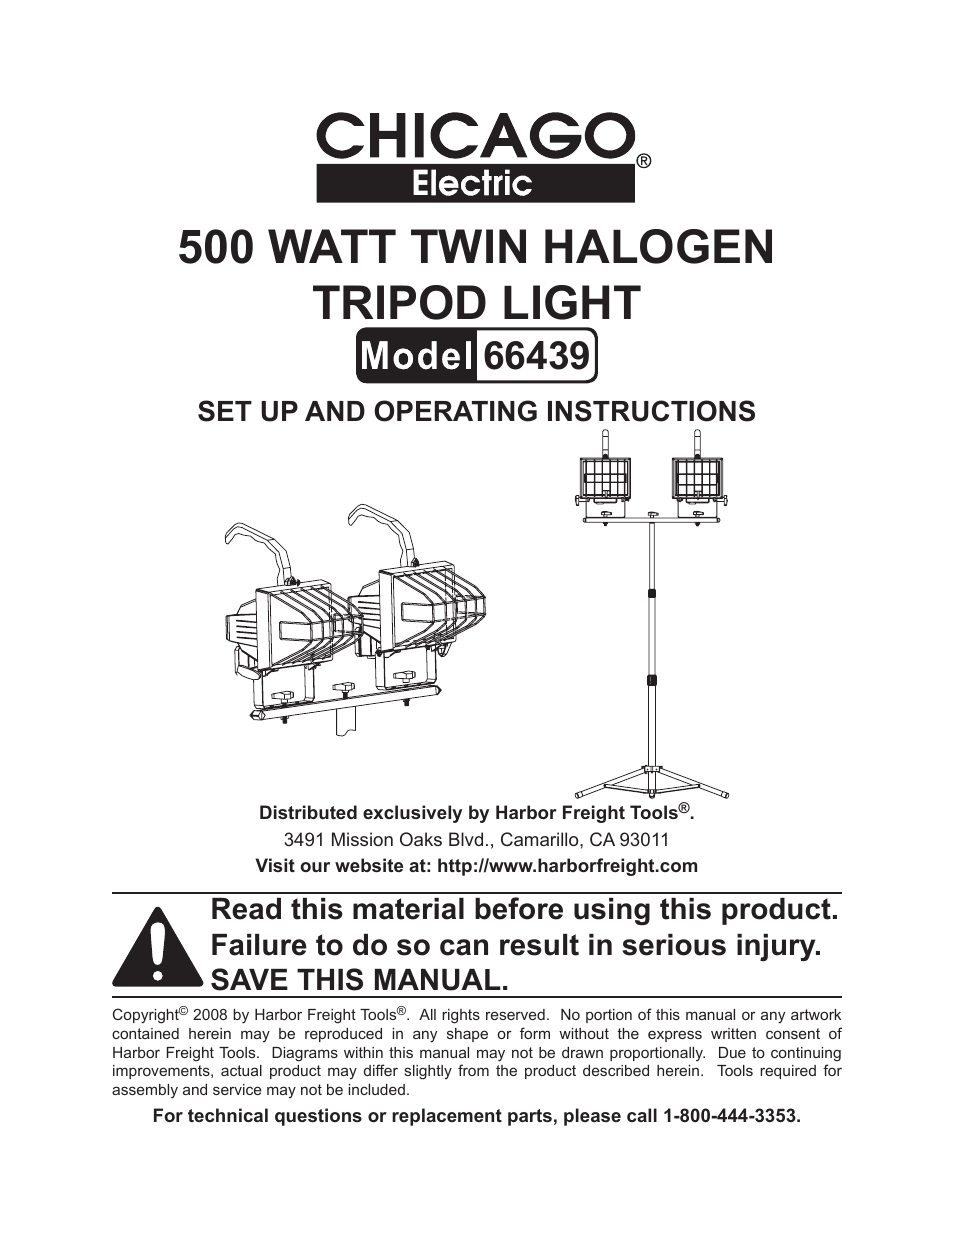 Chicago Electric 500 watt twin halogen tripod light 66439 User Manual | 12 pages